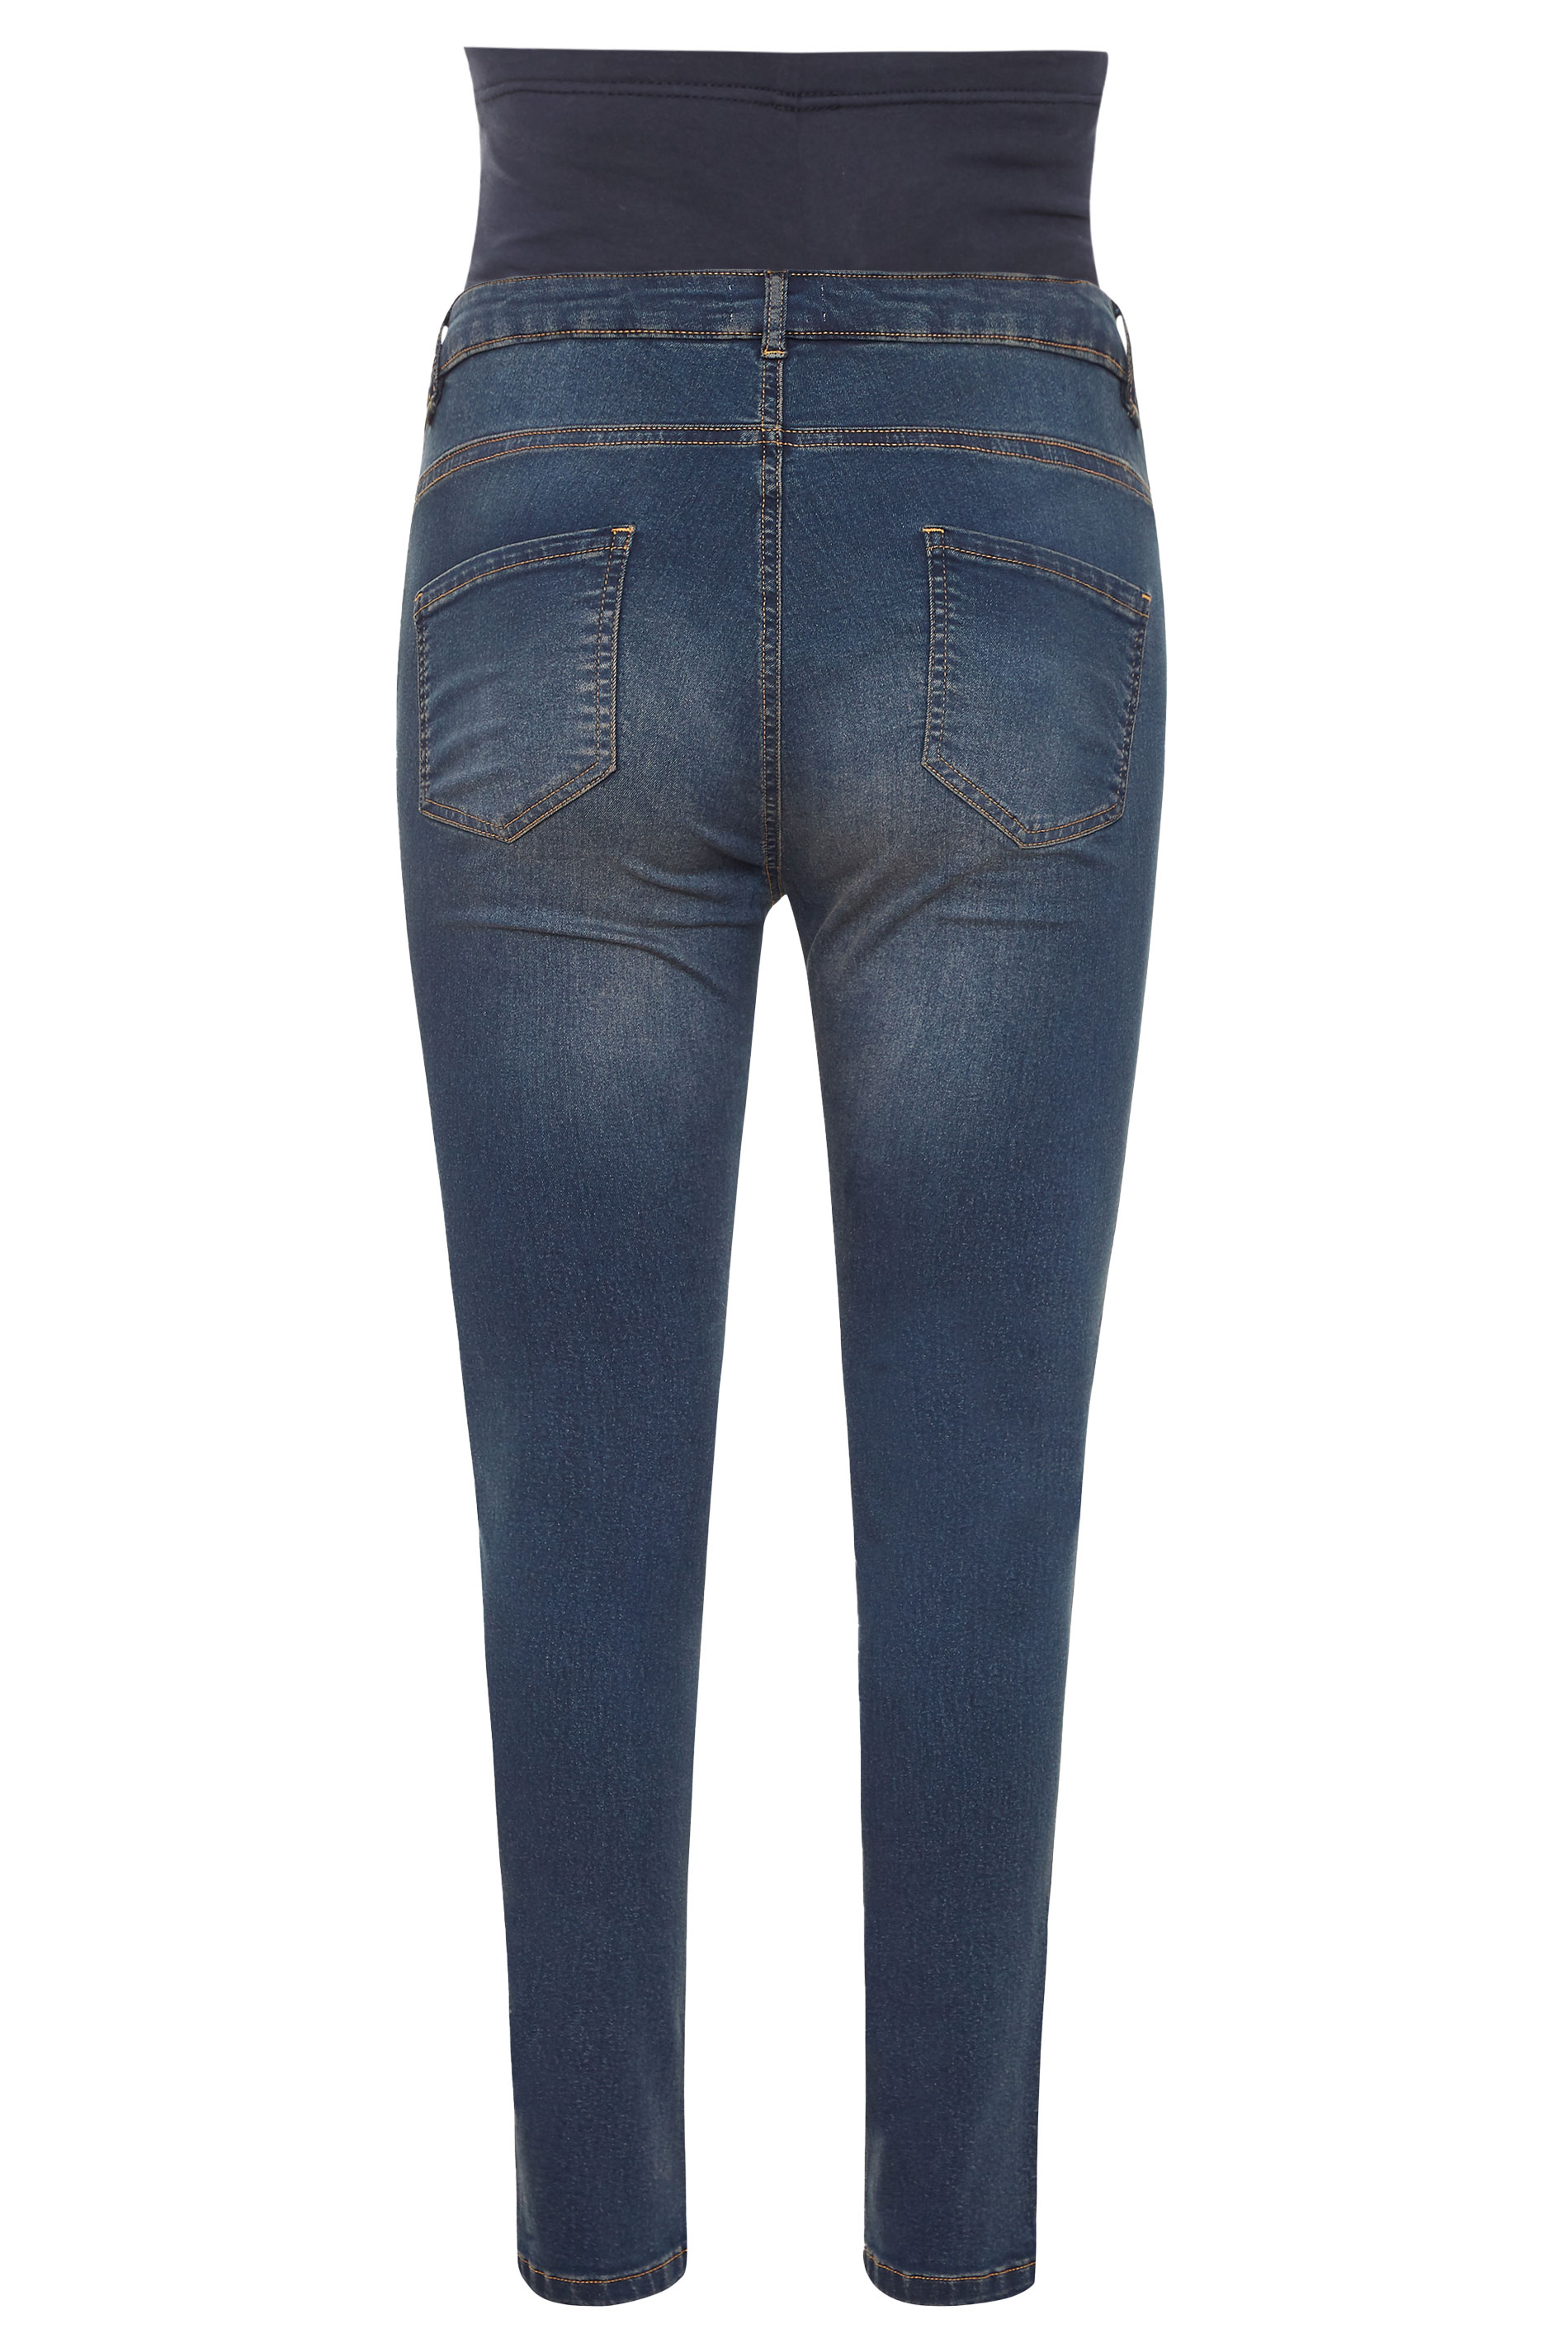 BUMP IT UP MATERNITY Blue Skinny Jeans | Yours Clothing